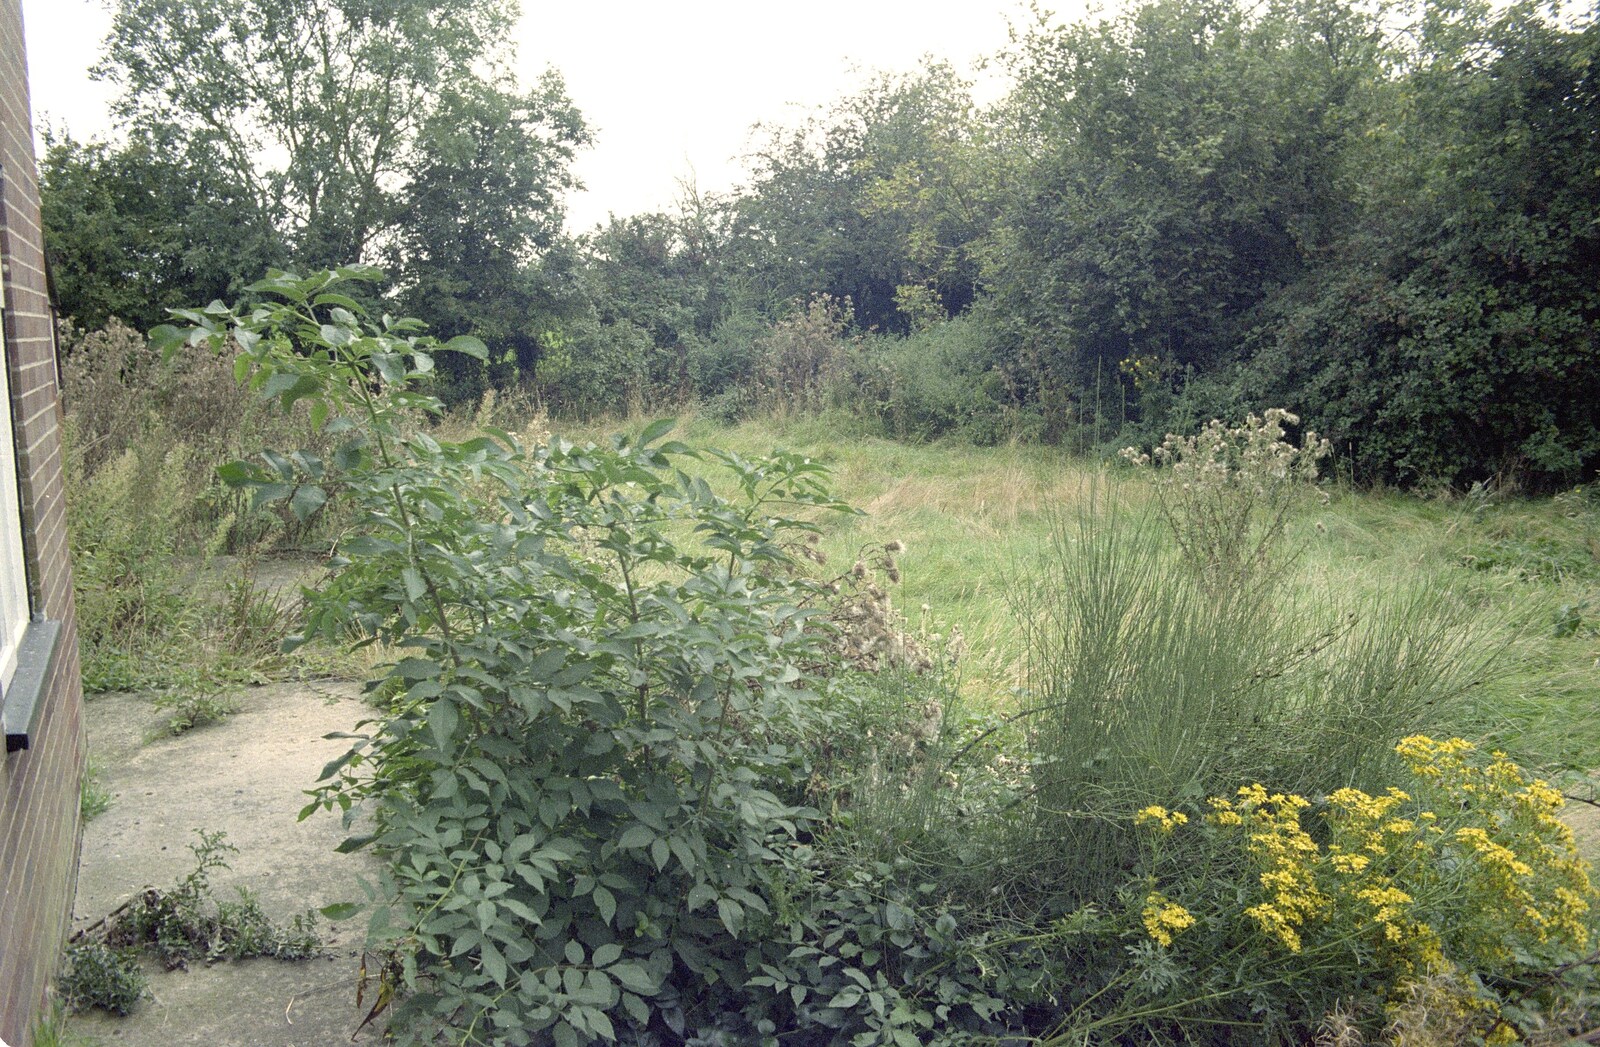 The corner of the front garden from Moving In, Brome, Suffolk - 10th April 1994